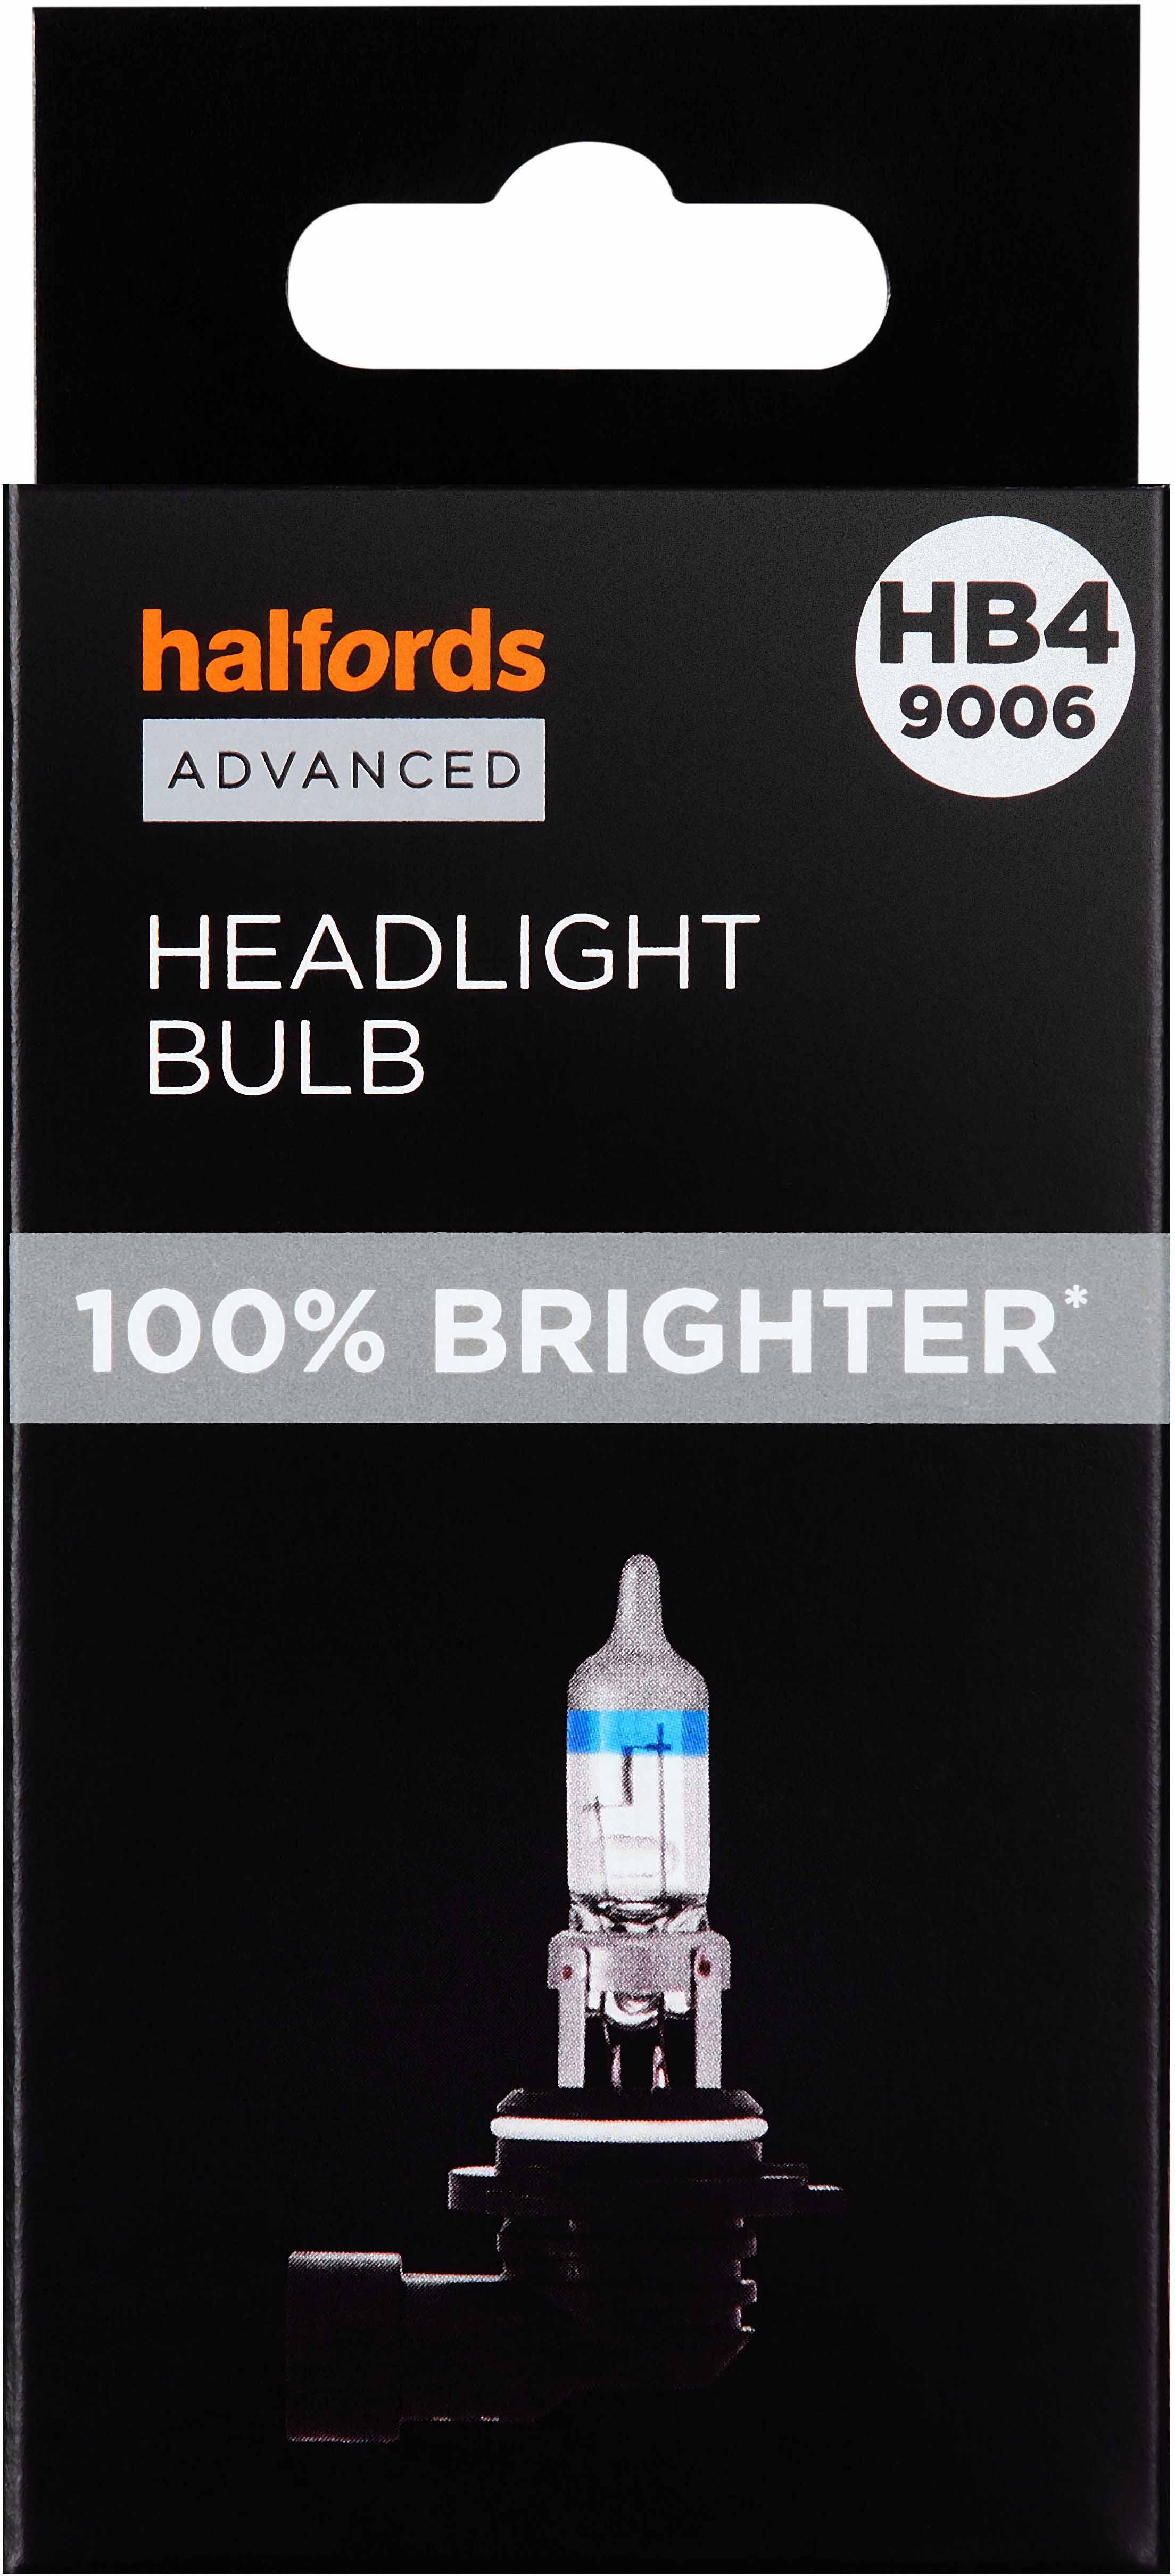 Hb4 9006 Car Headlight Bulb Halfords Advanced Up To +100 Percent Brighter Single Pack